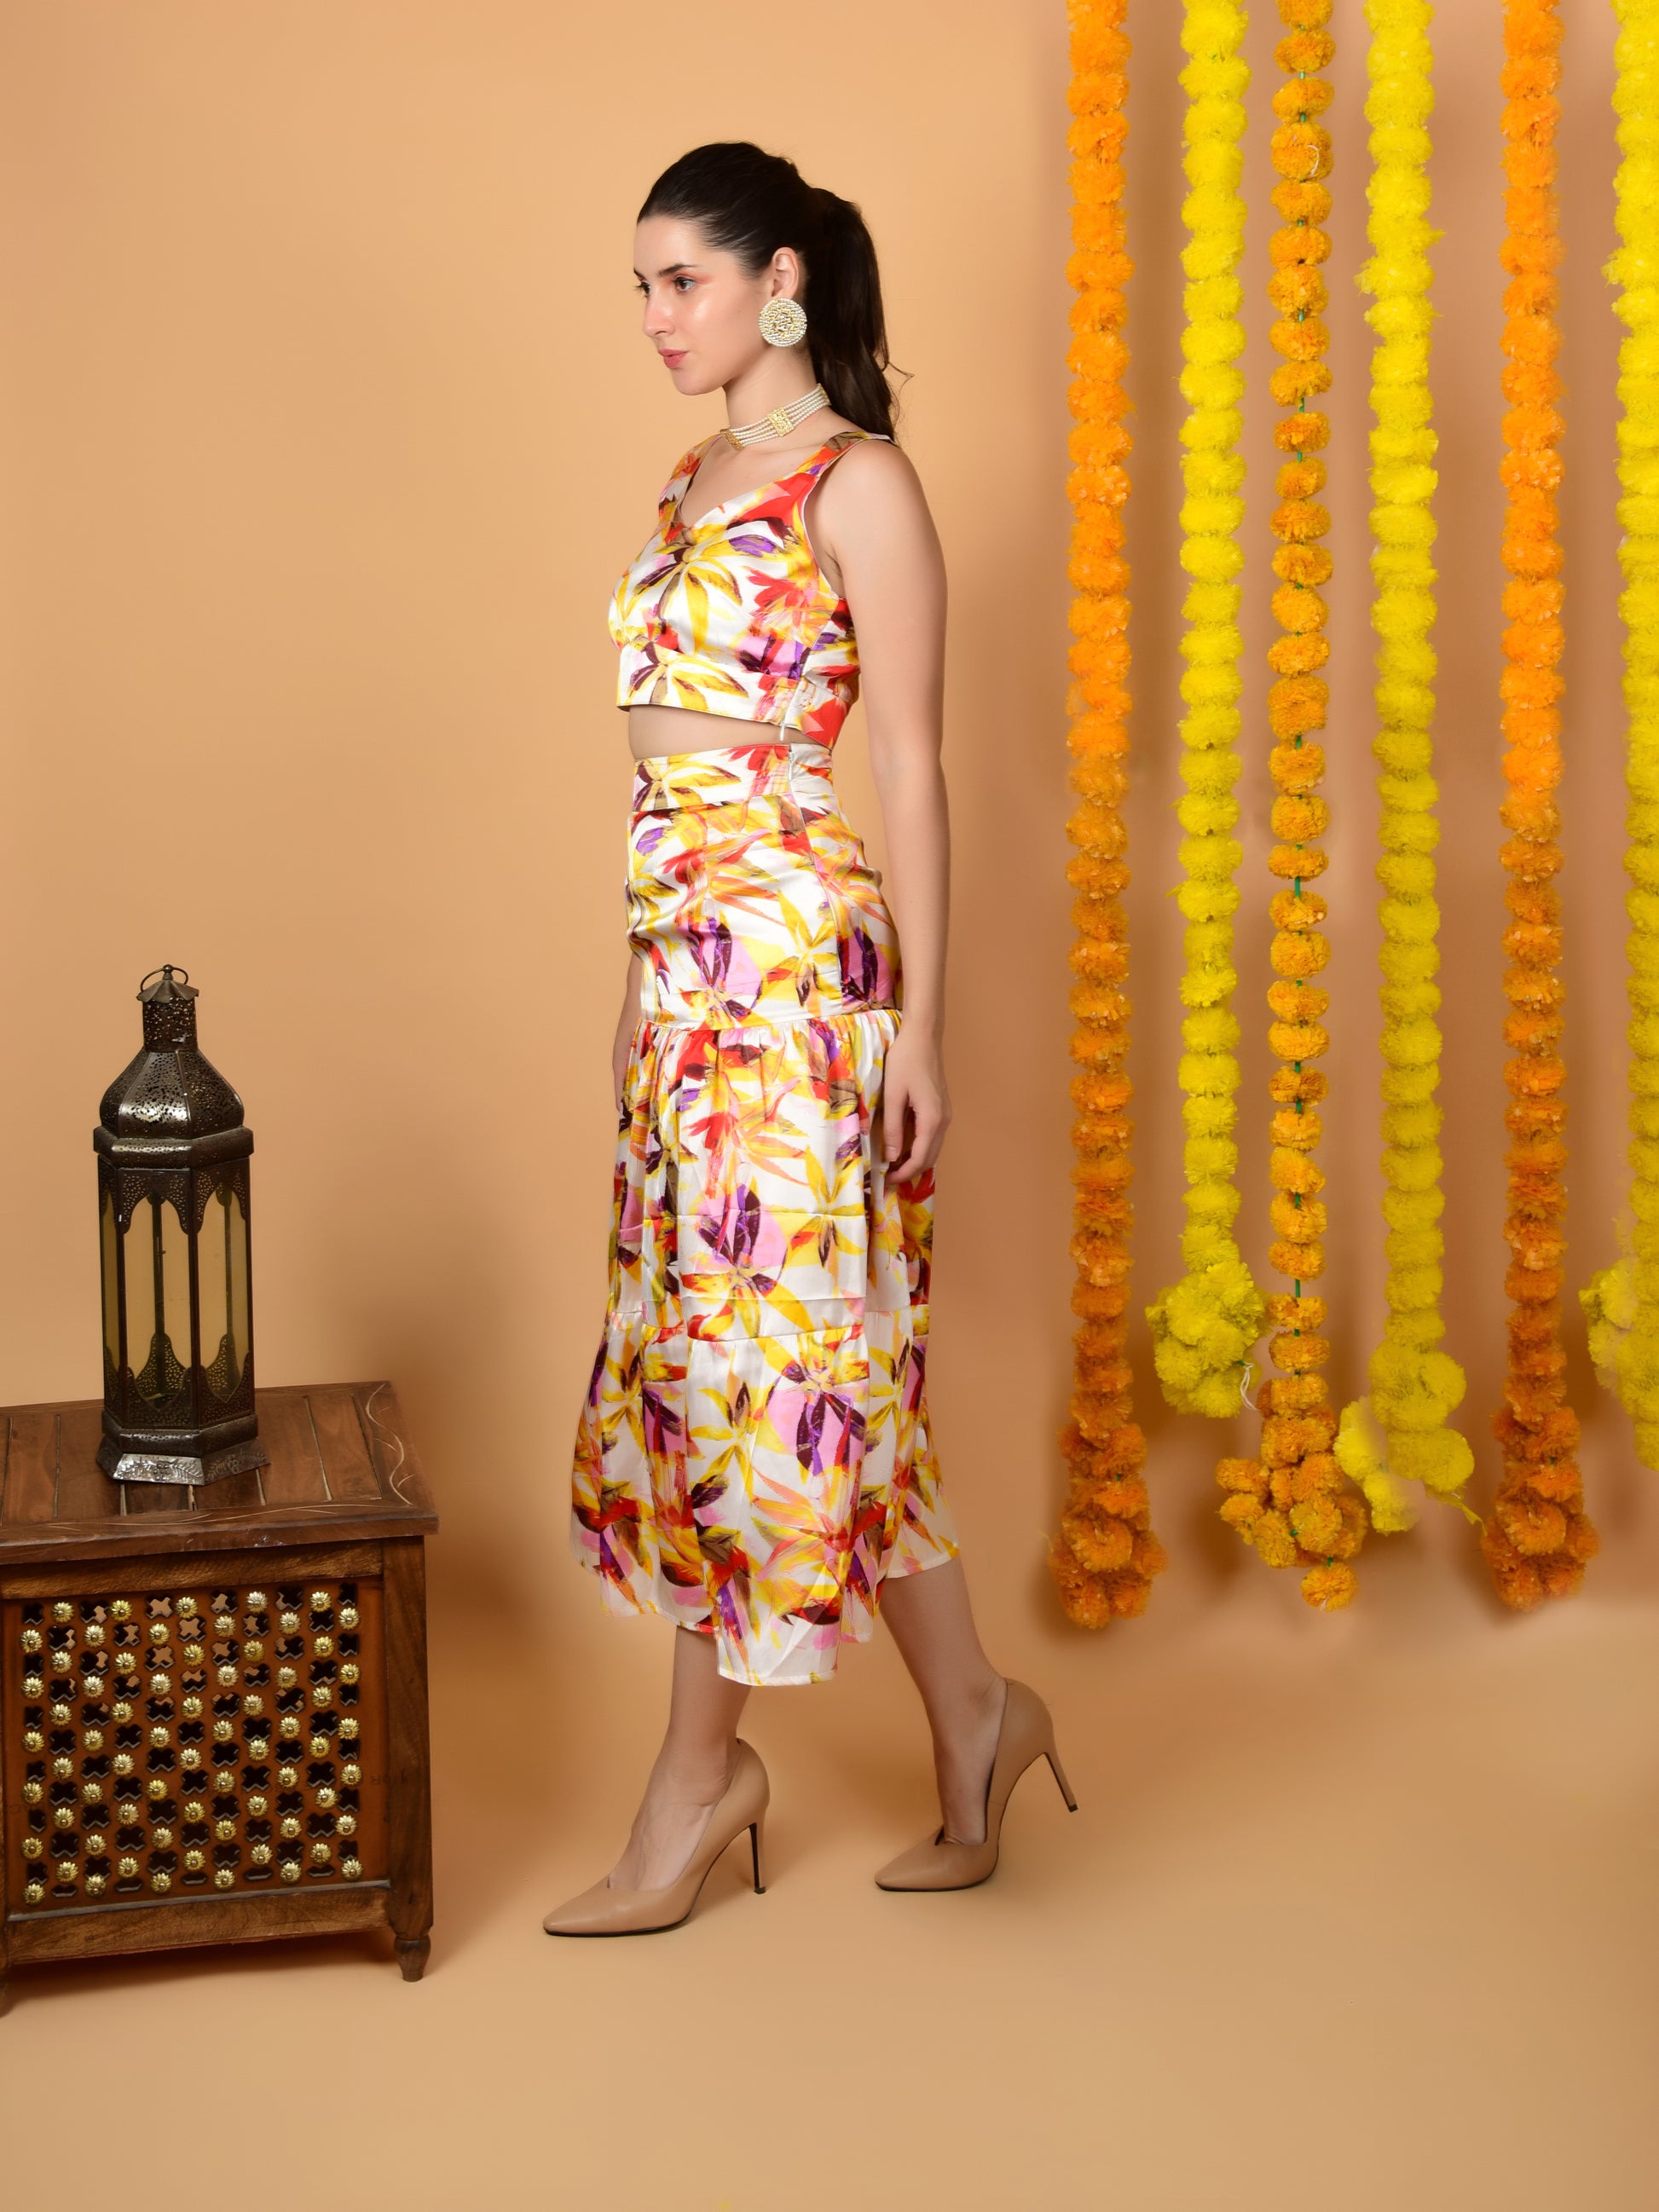 Multicolor Printed Satin Crop Top & Skirt Set - Festive & Party Ready! Being Flawless